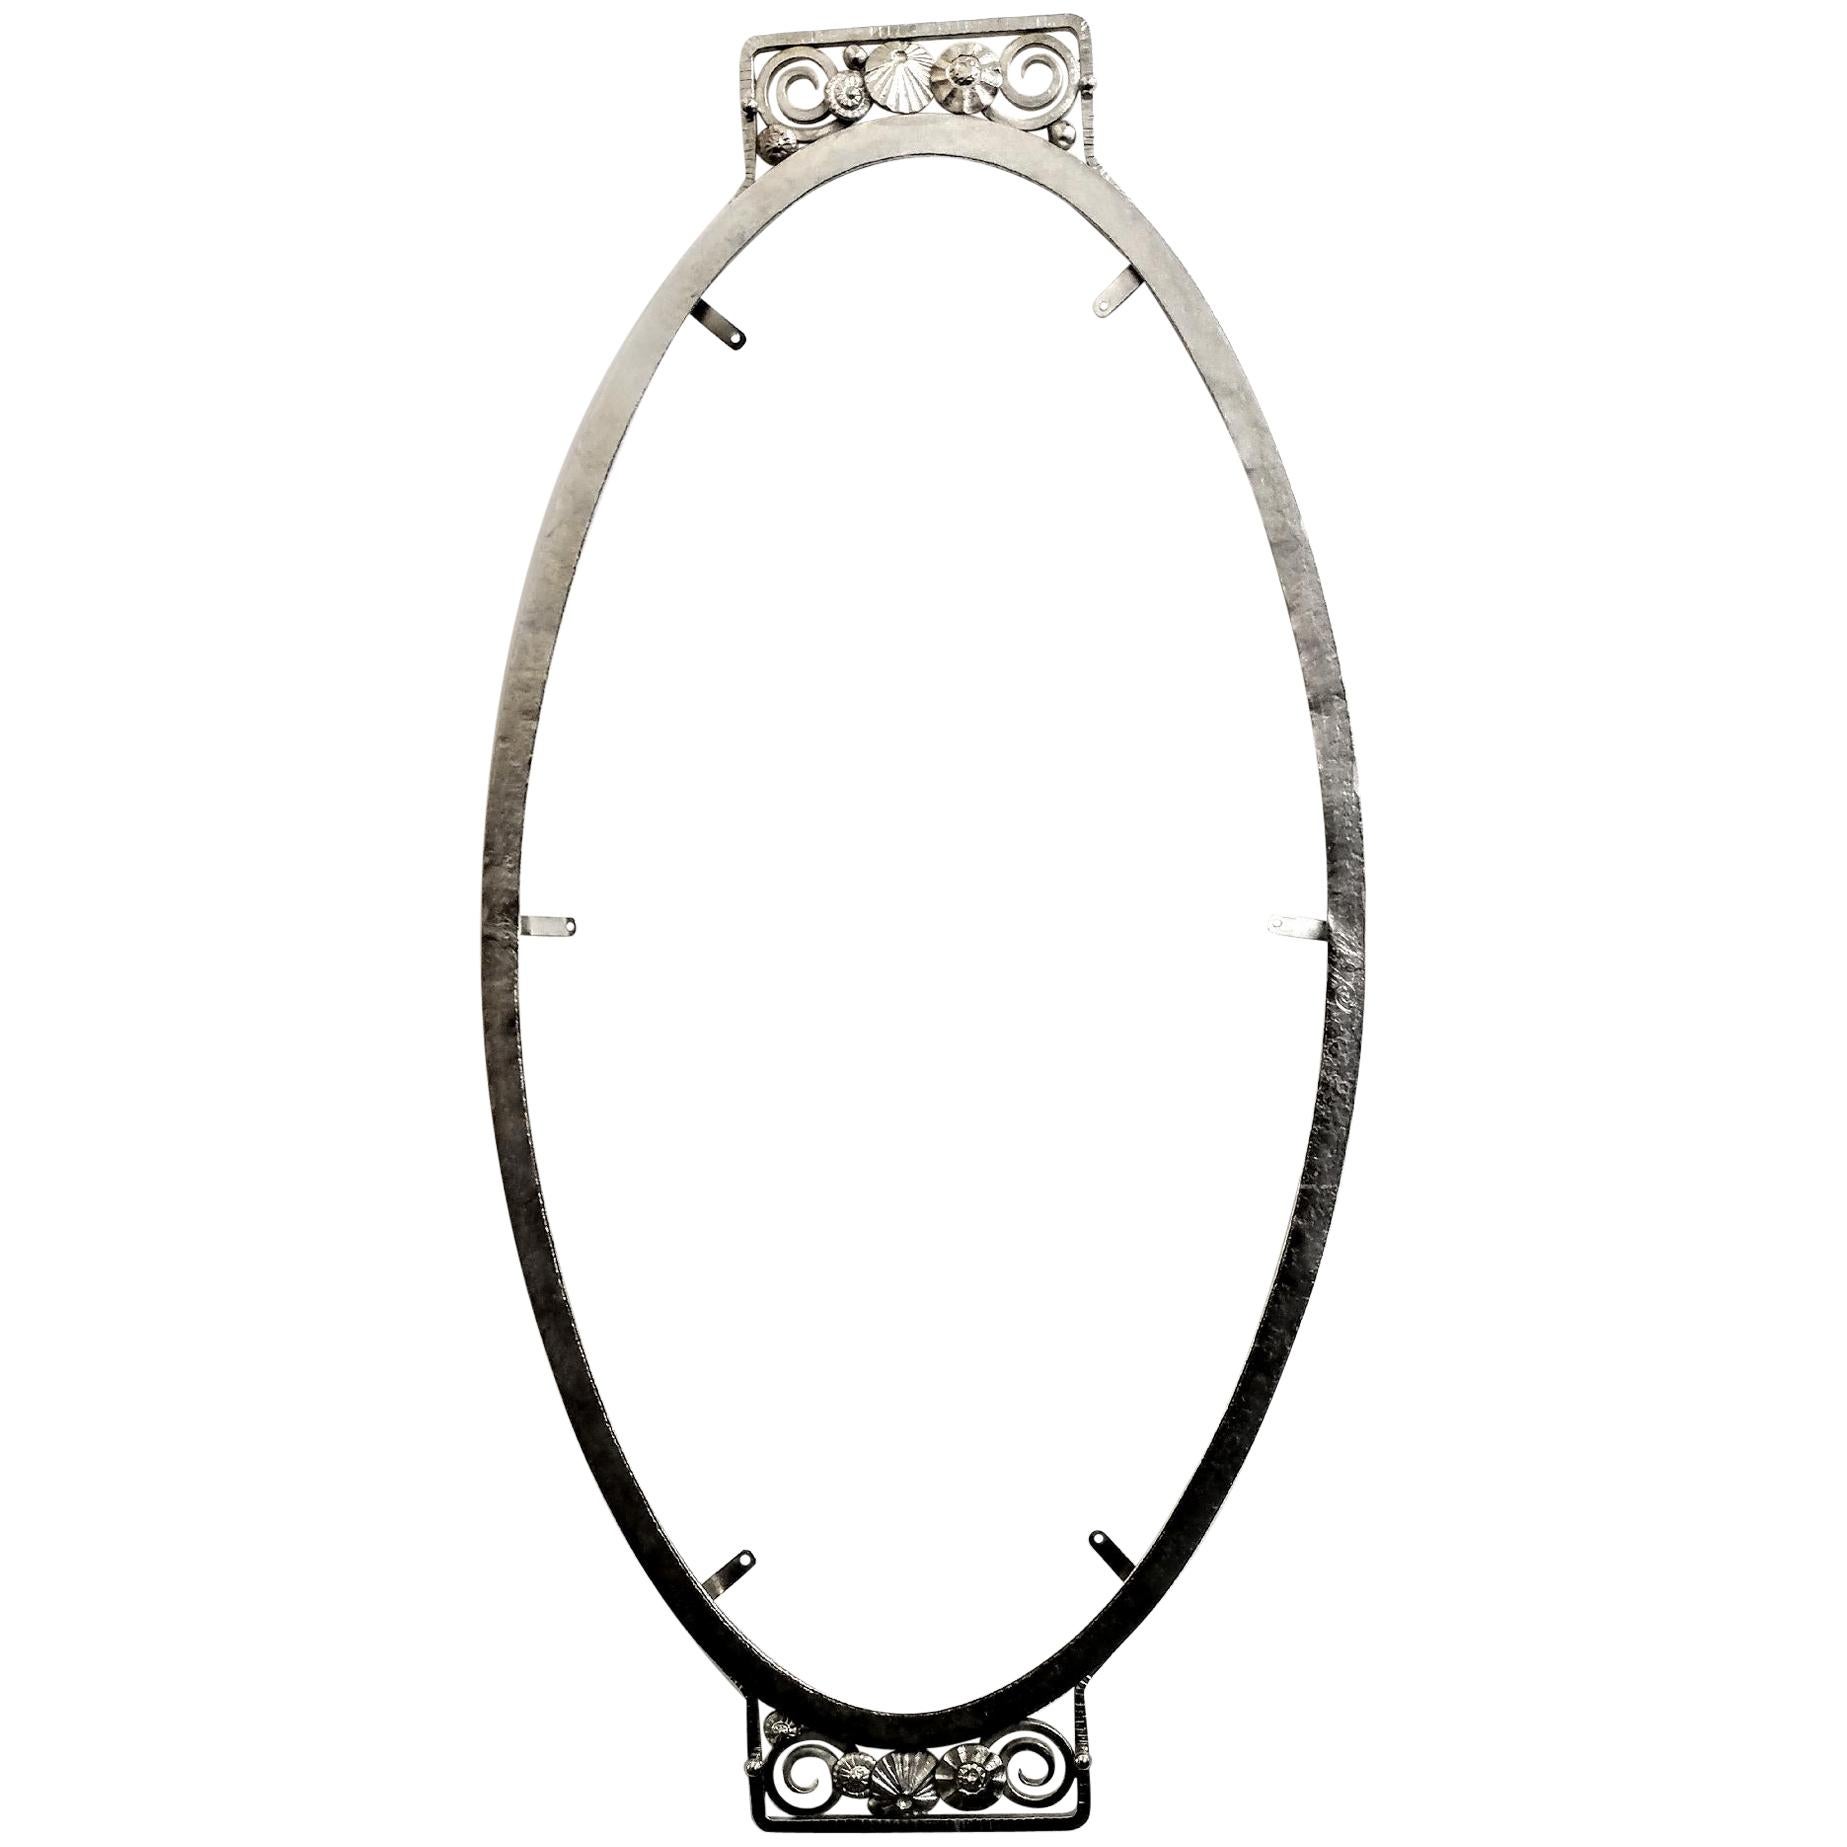 French Art Deco wrought iron mirror frame with intricate geometric flower motif on both ends. The frame has been replated in nickel. The mirror can be used horizontally or vertically. Including a new beveled mirror. We are the rare source that